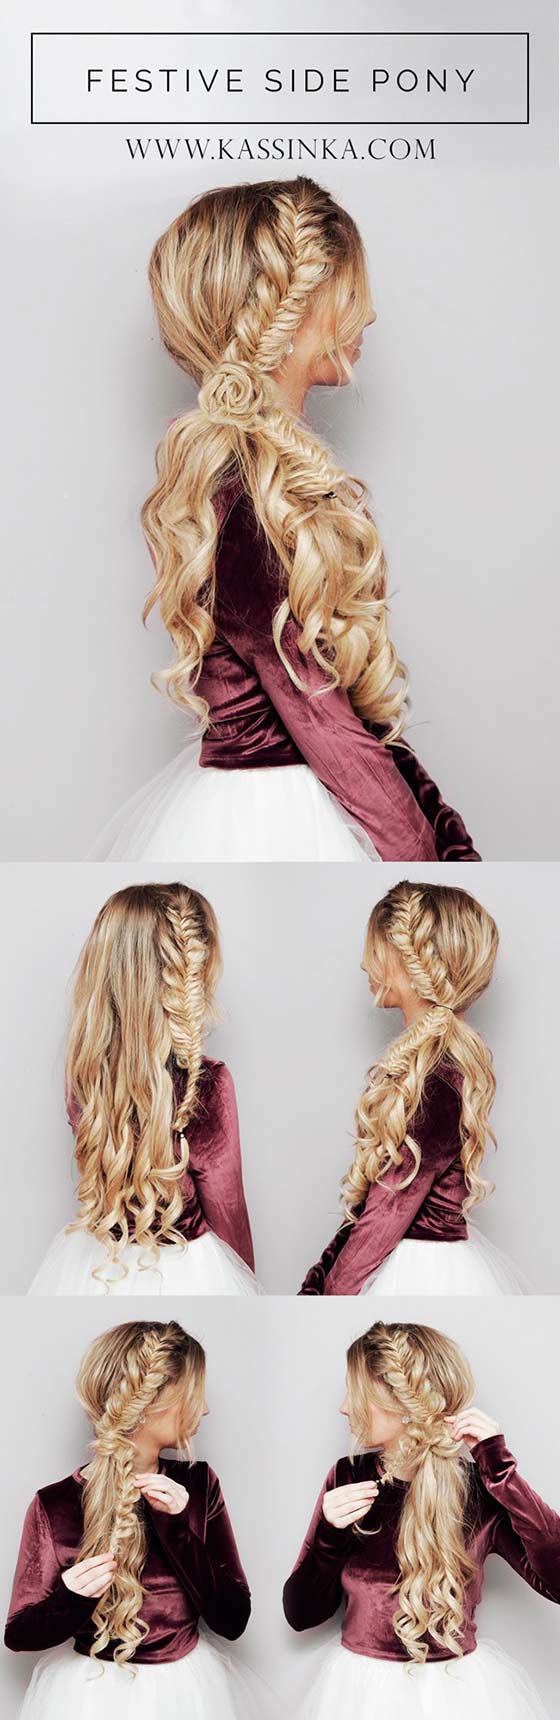 Festive side ponytail braided hairstyle for long hair